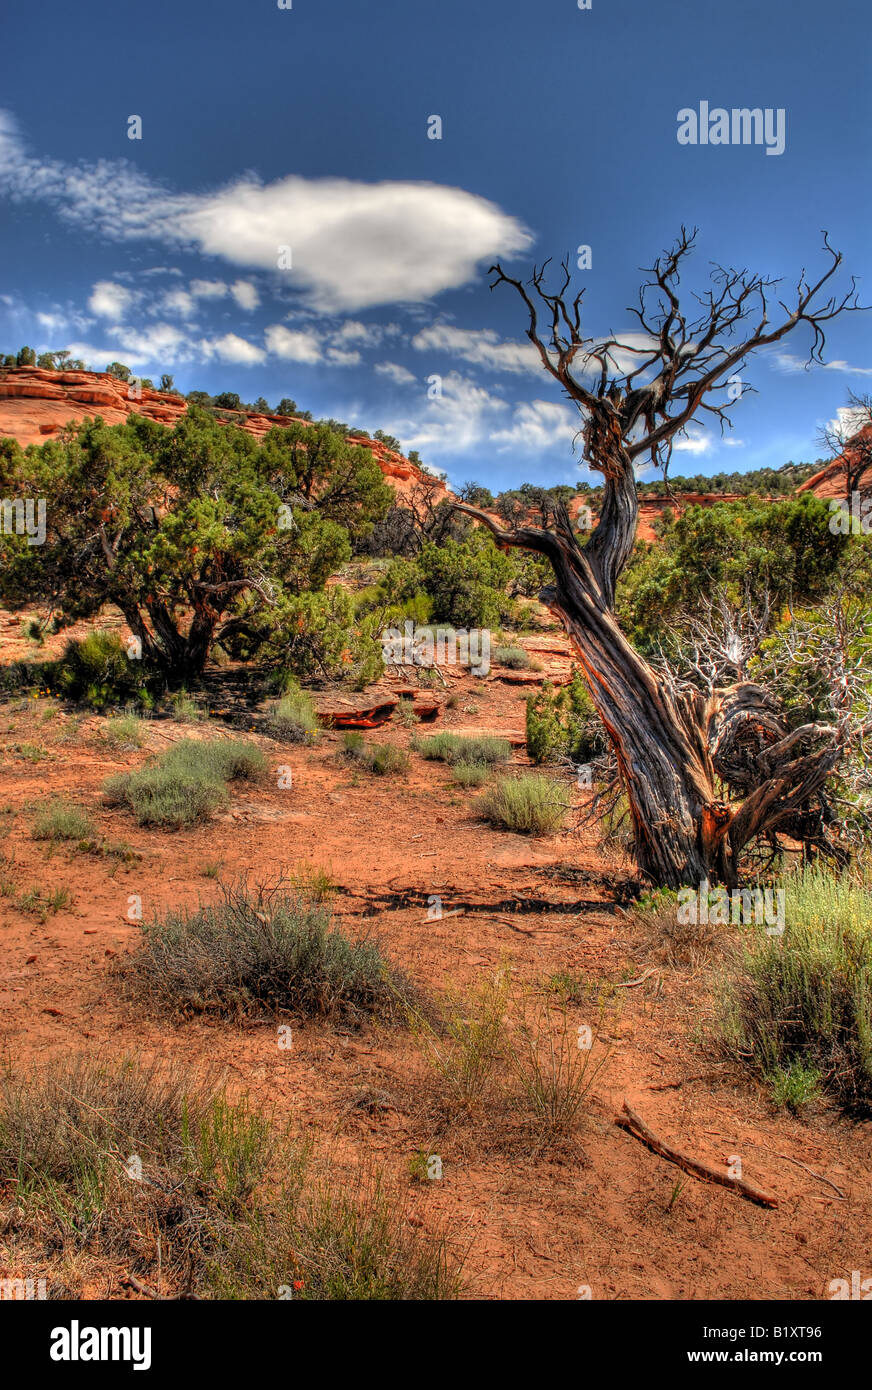 HDR image of a Canyon Stock Photo